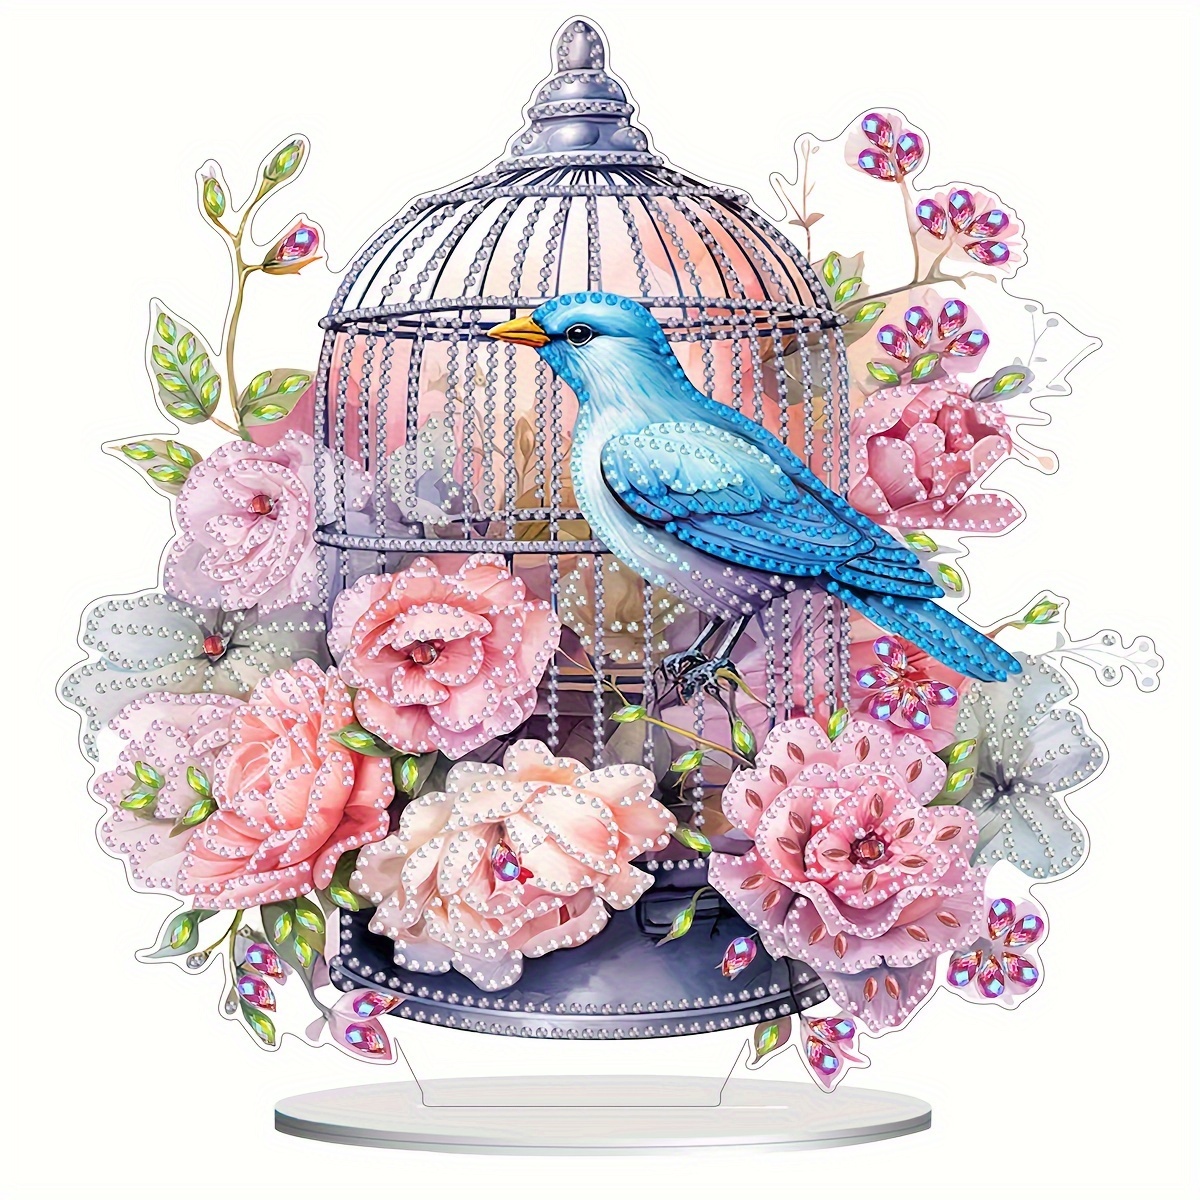 

5d Diy Dual-sided Bird Cage Diamond Painting Kit, Animal Theme Acrylic (pmma) Tabletop Decor With Special Shaped Diamonds, Mosaic Art Craft For Home And Office Desk Decor With Gift Box